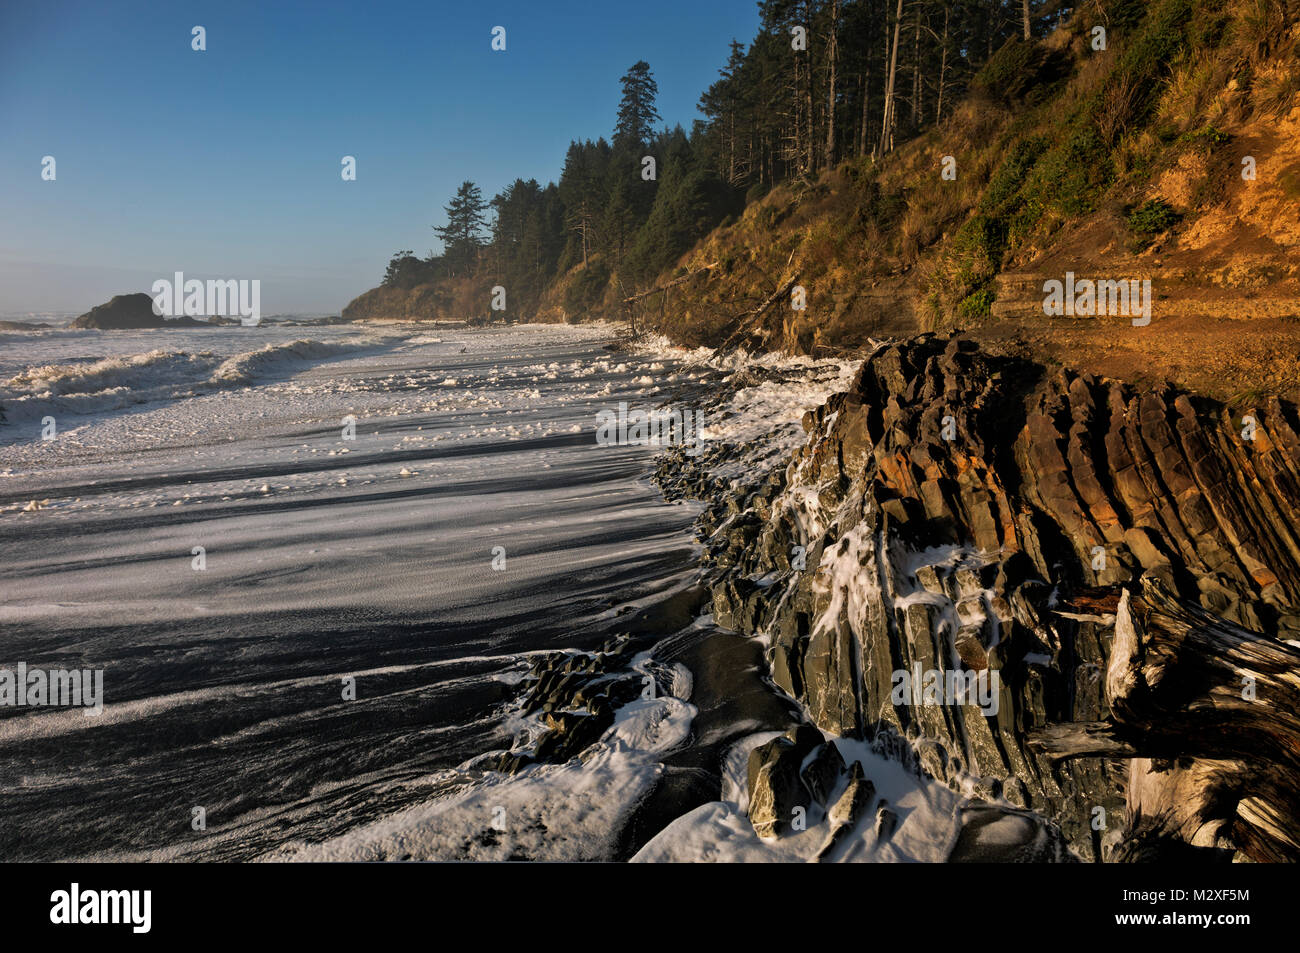 WA13261-00...CALIFORNIA - Layered rock and high tide at  Beach 4 on the Pacific Coast in Olympic National Park. Stock Photo